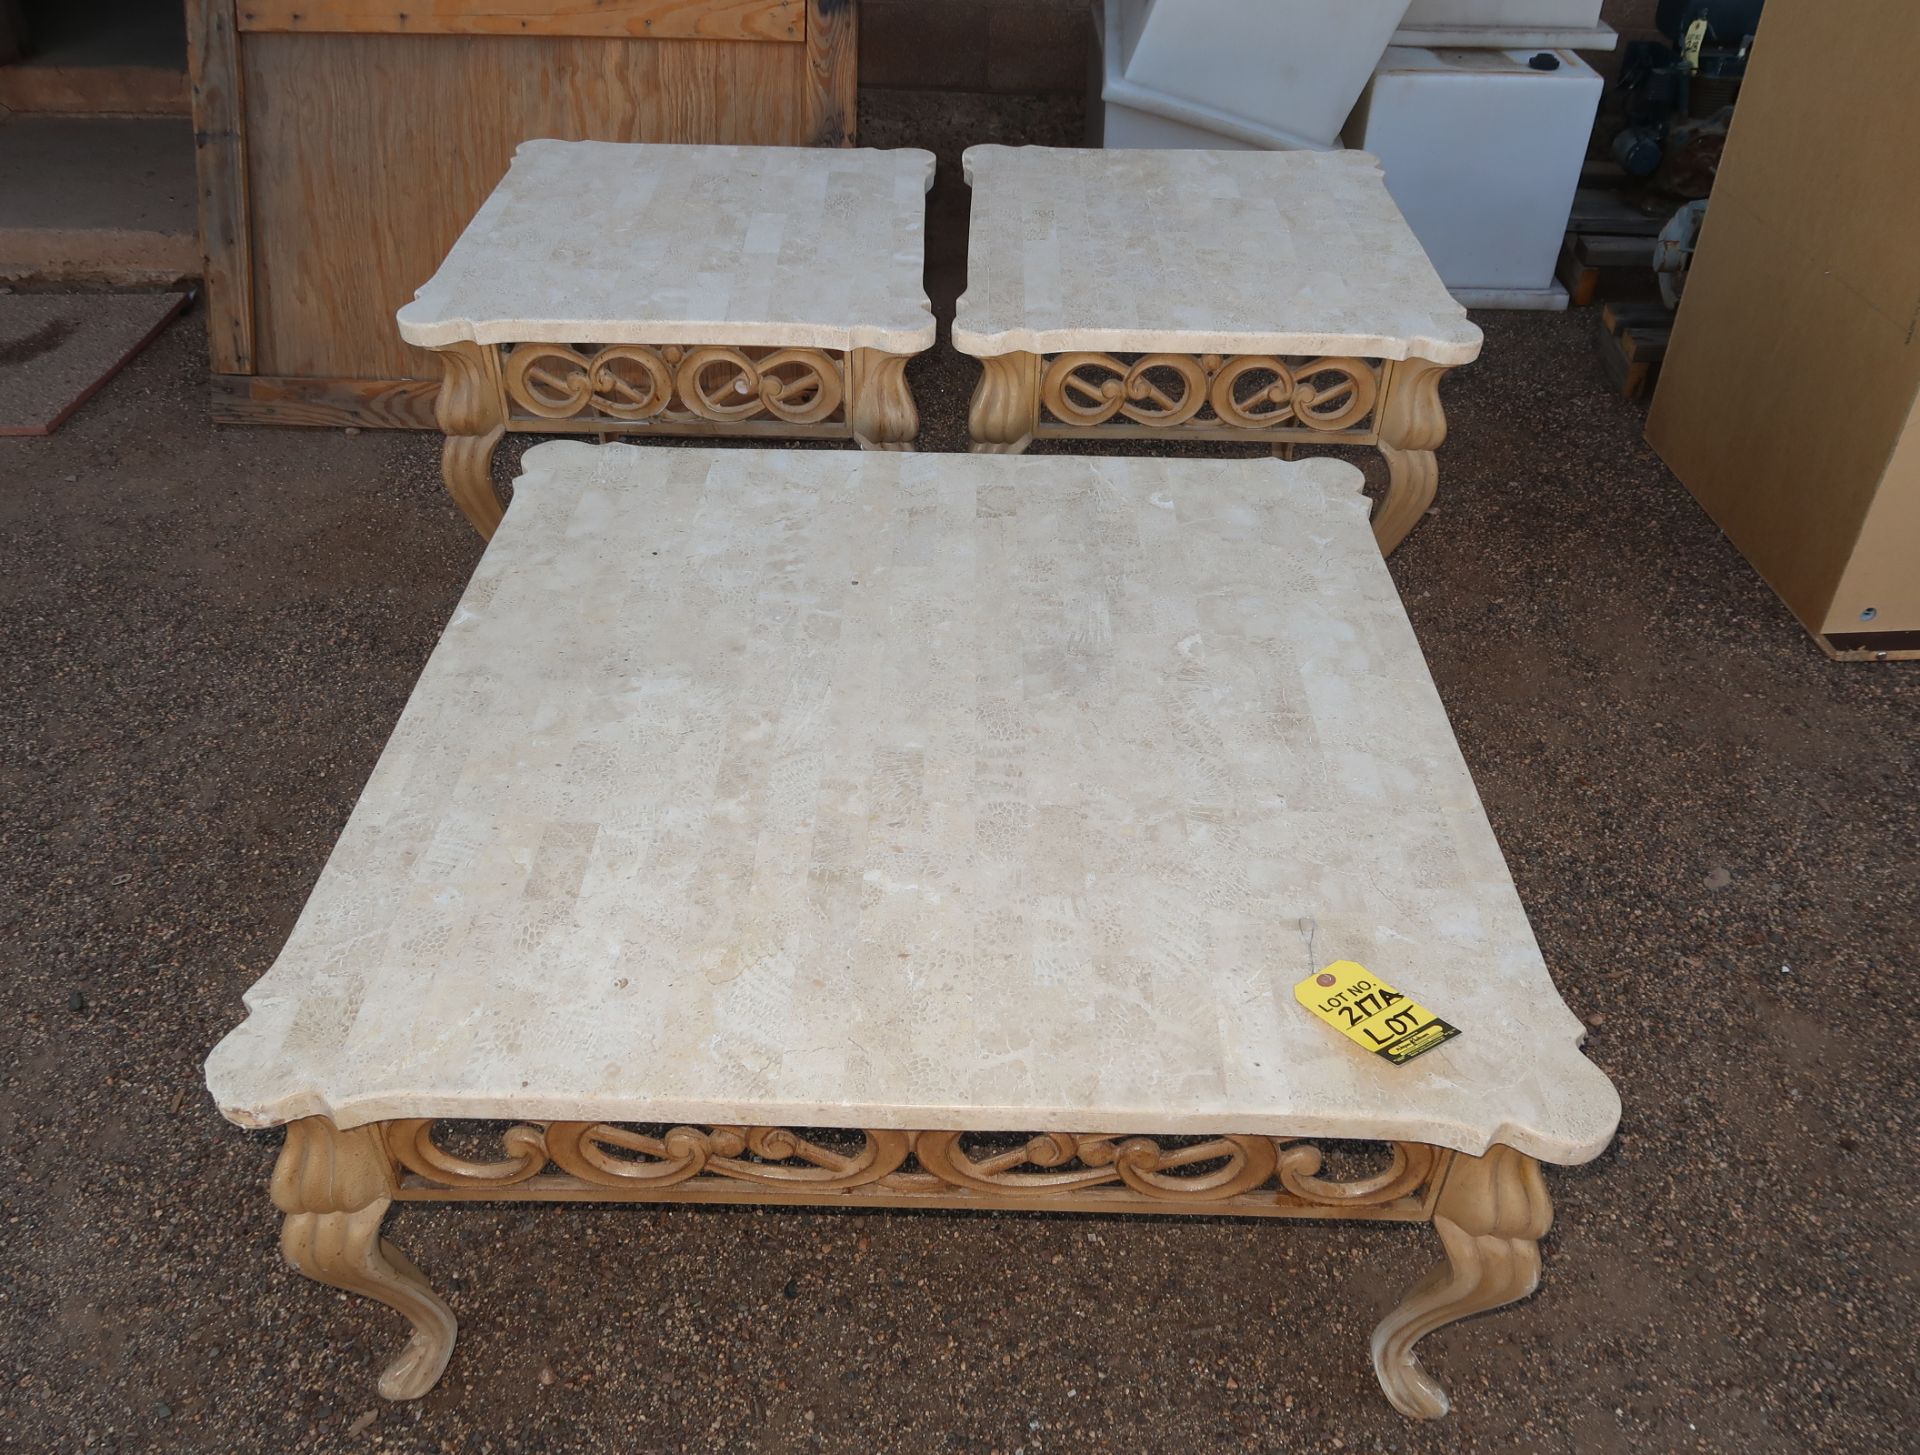 SET OF COFFEE TABLE W/ 2 END TABLES